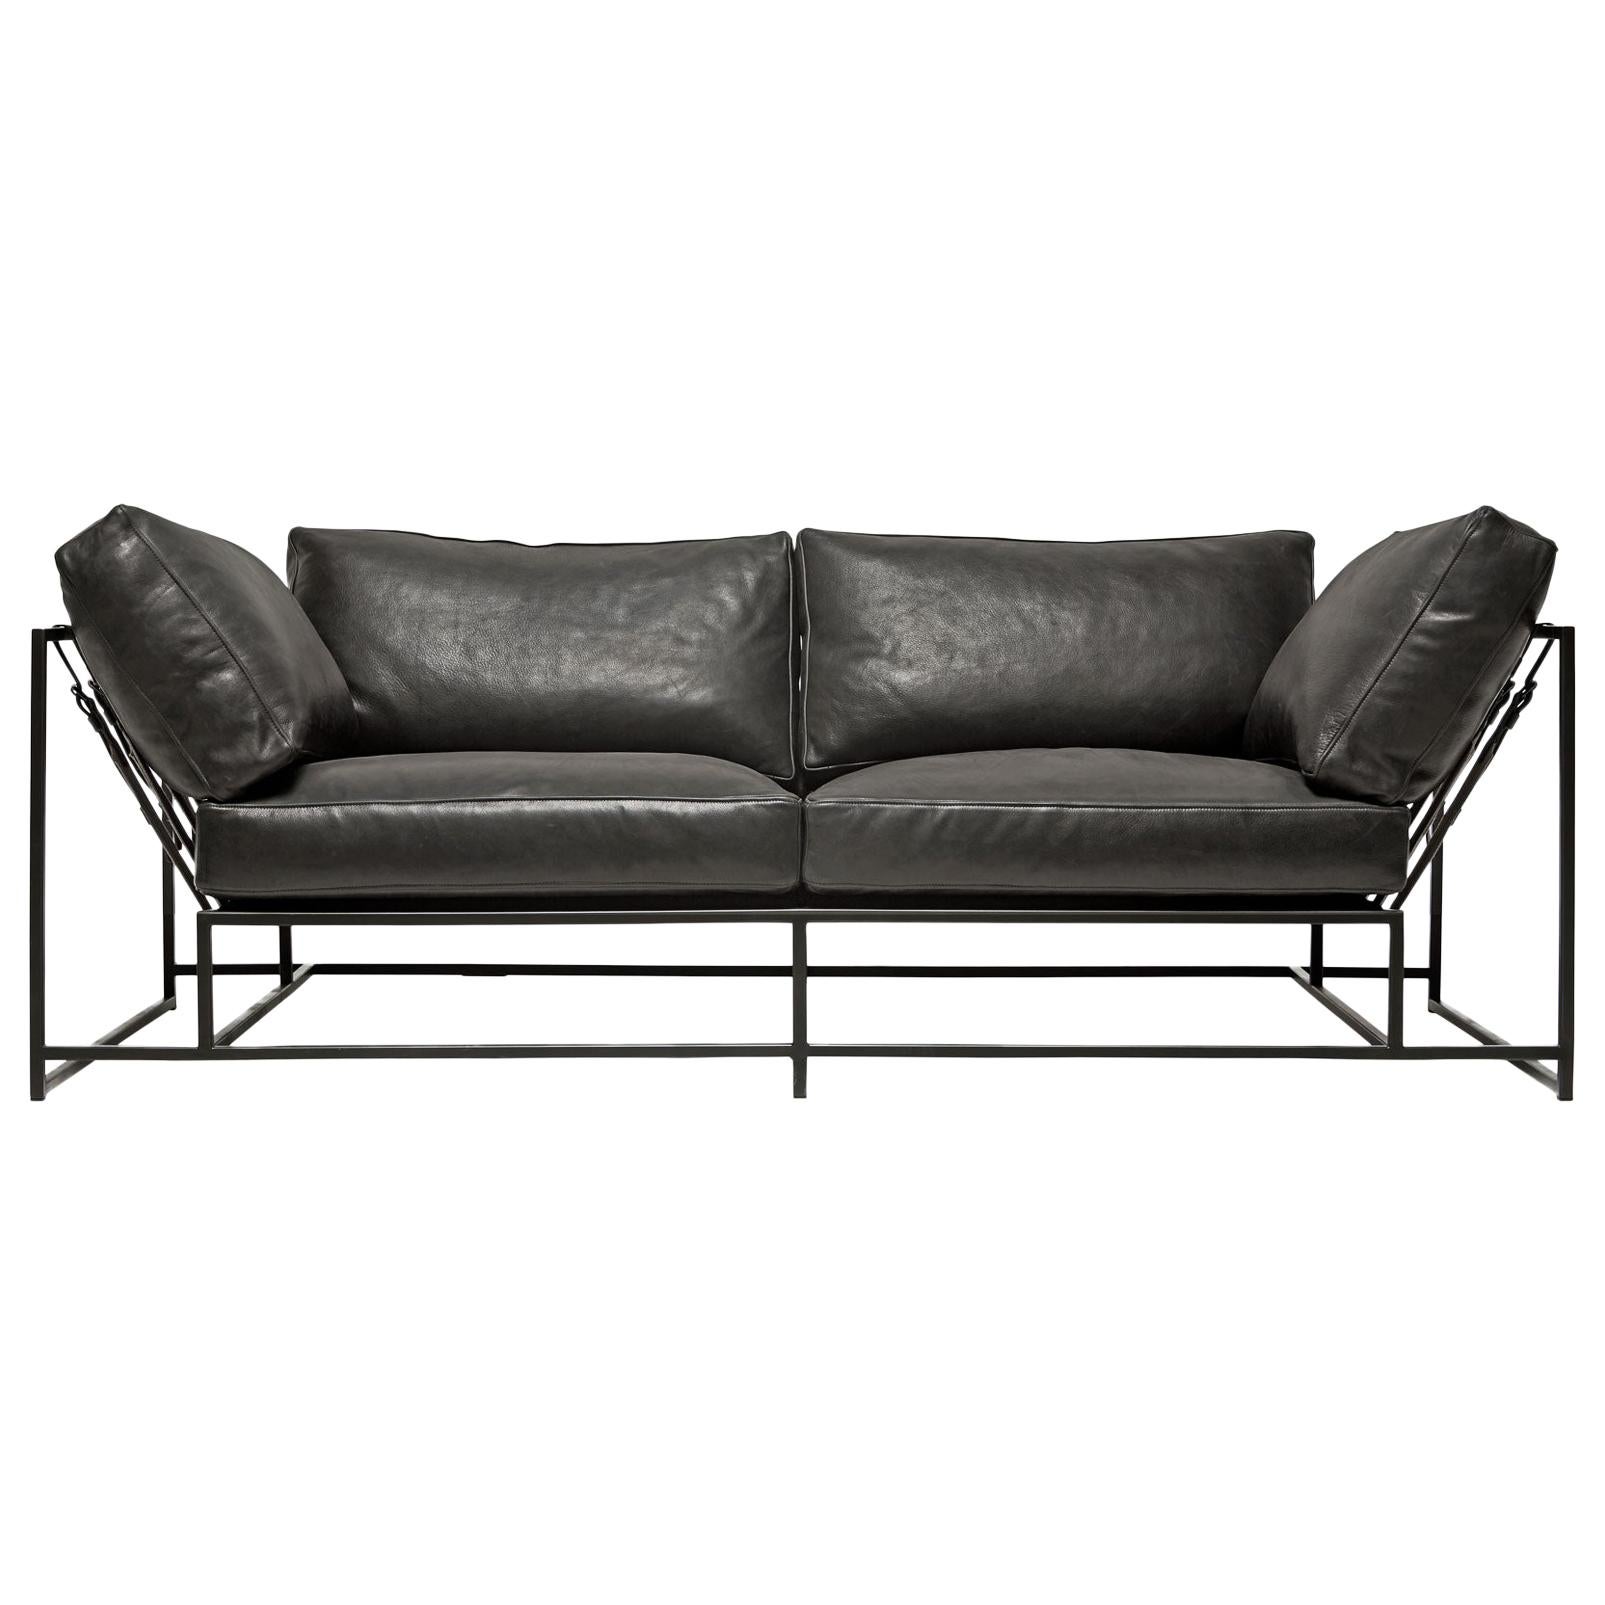 Pebbled Black Leather and Blackened Steel Two-Seat Sofa For Sale